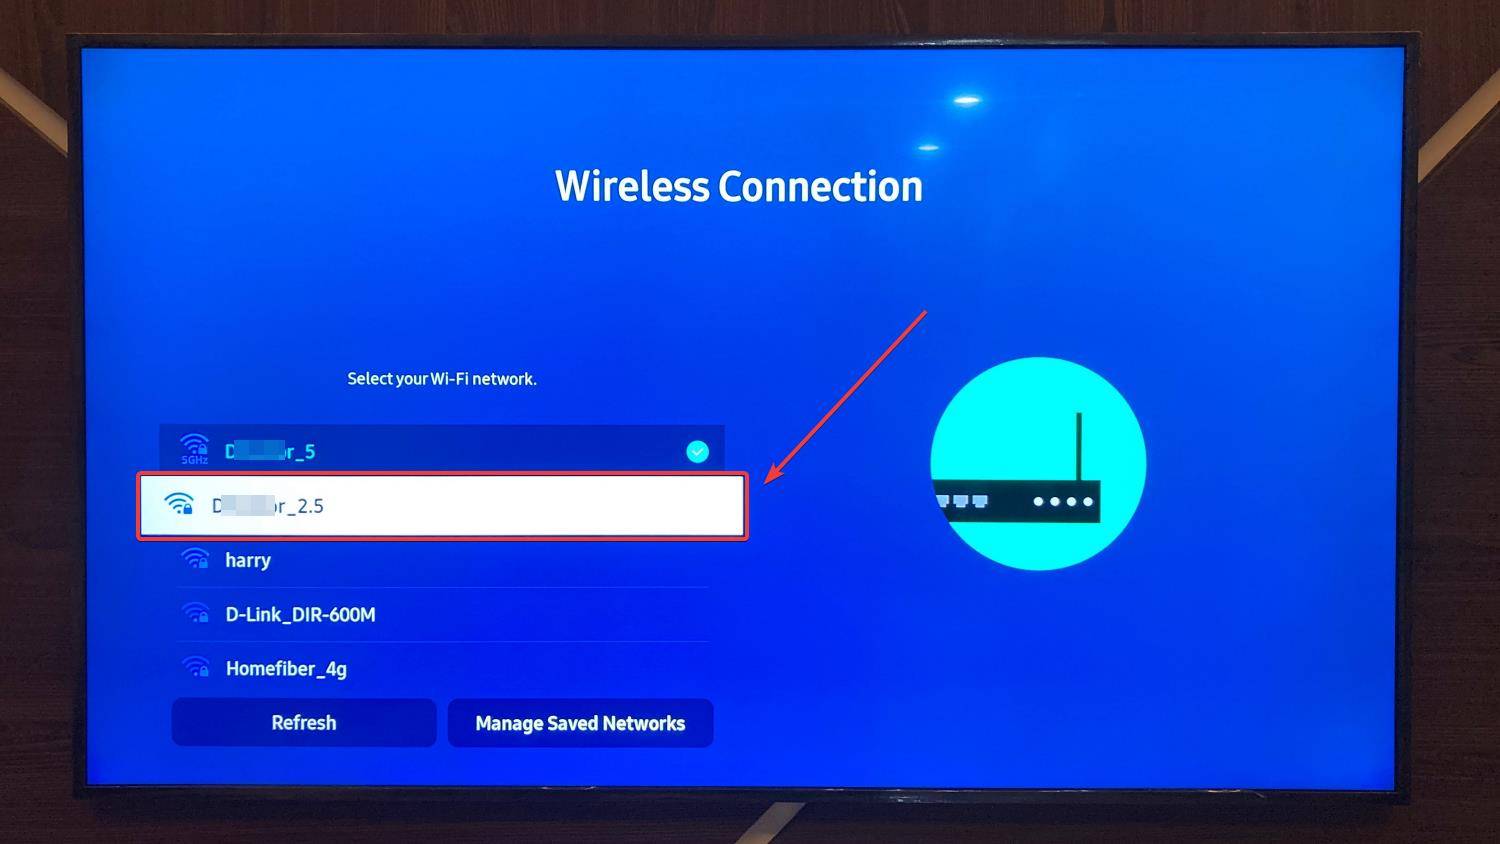 select wifi network to connect samsung smart tv mrnoob